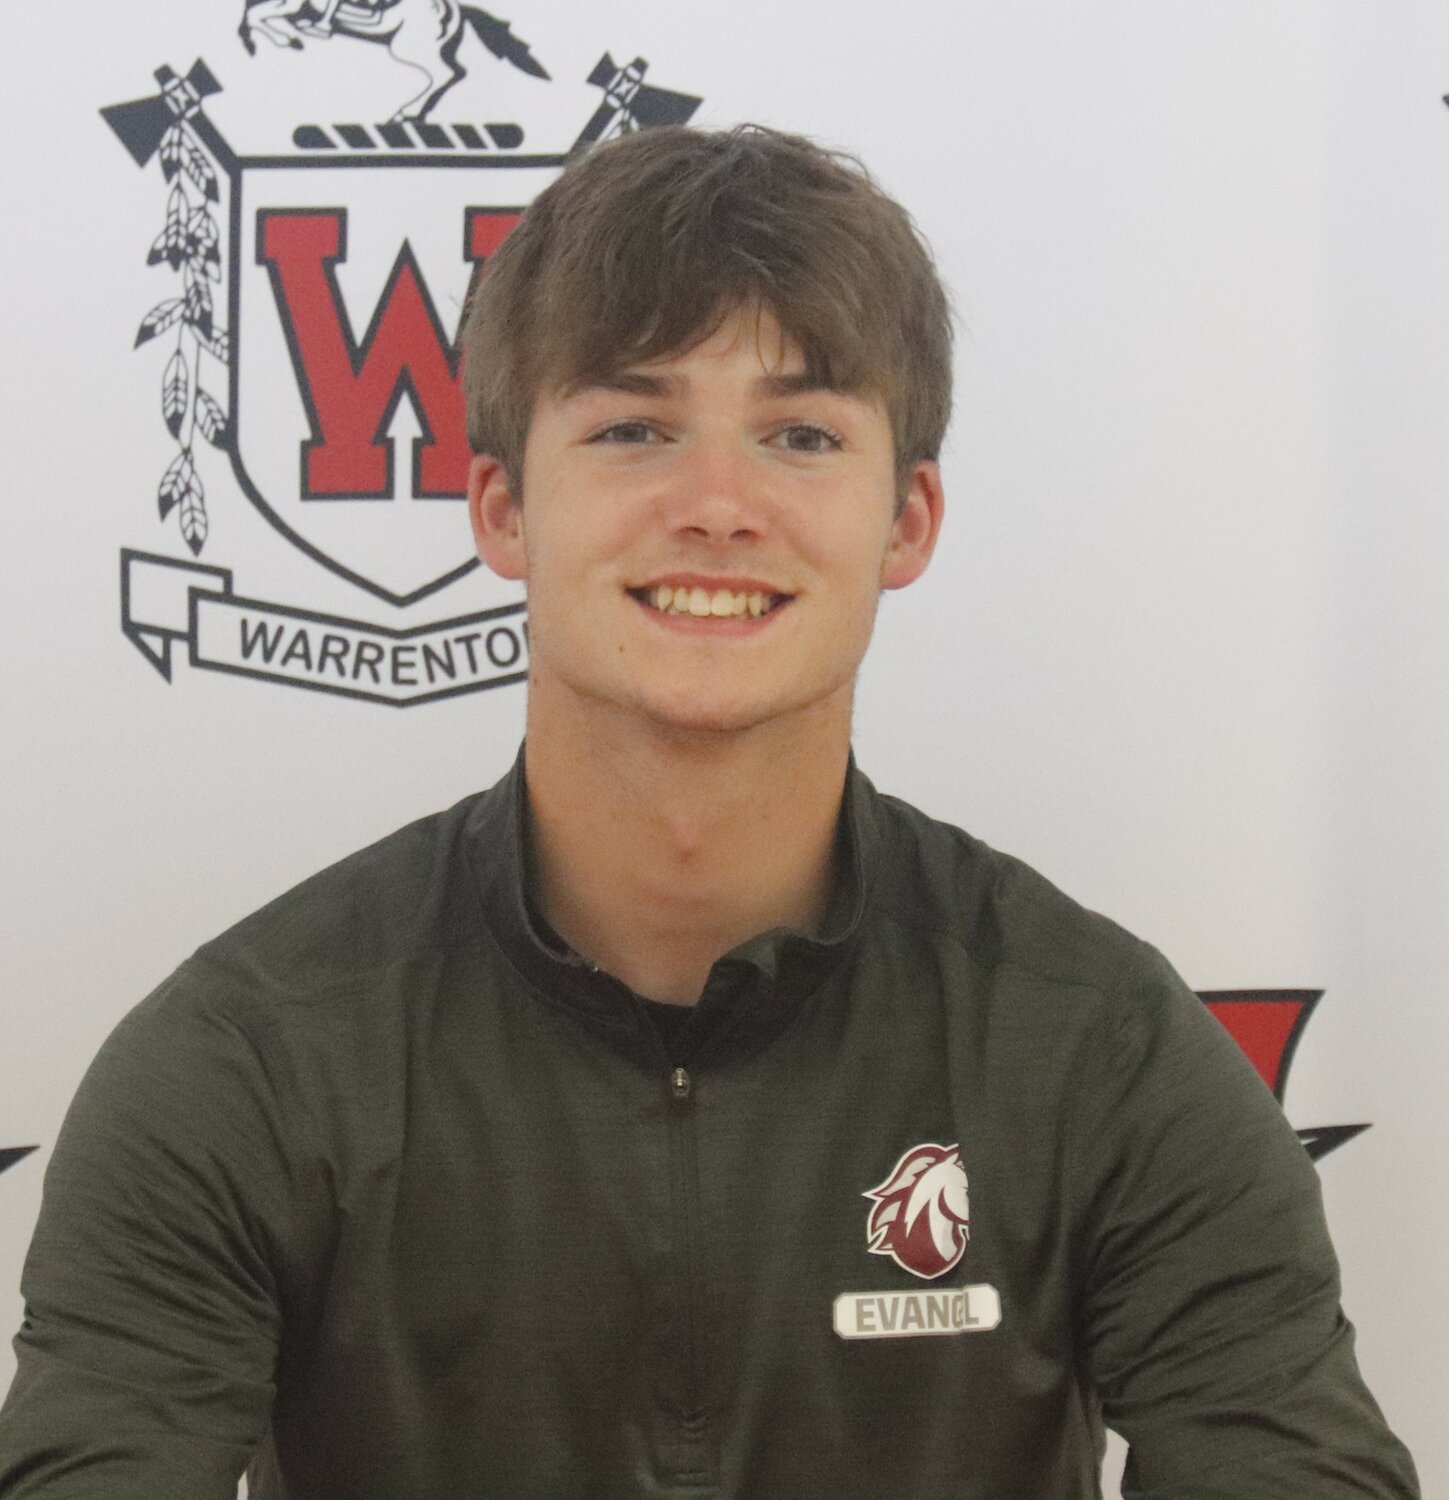 Colton Brosenne recently signed his letter of intent to play football at Evangel University.